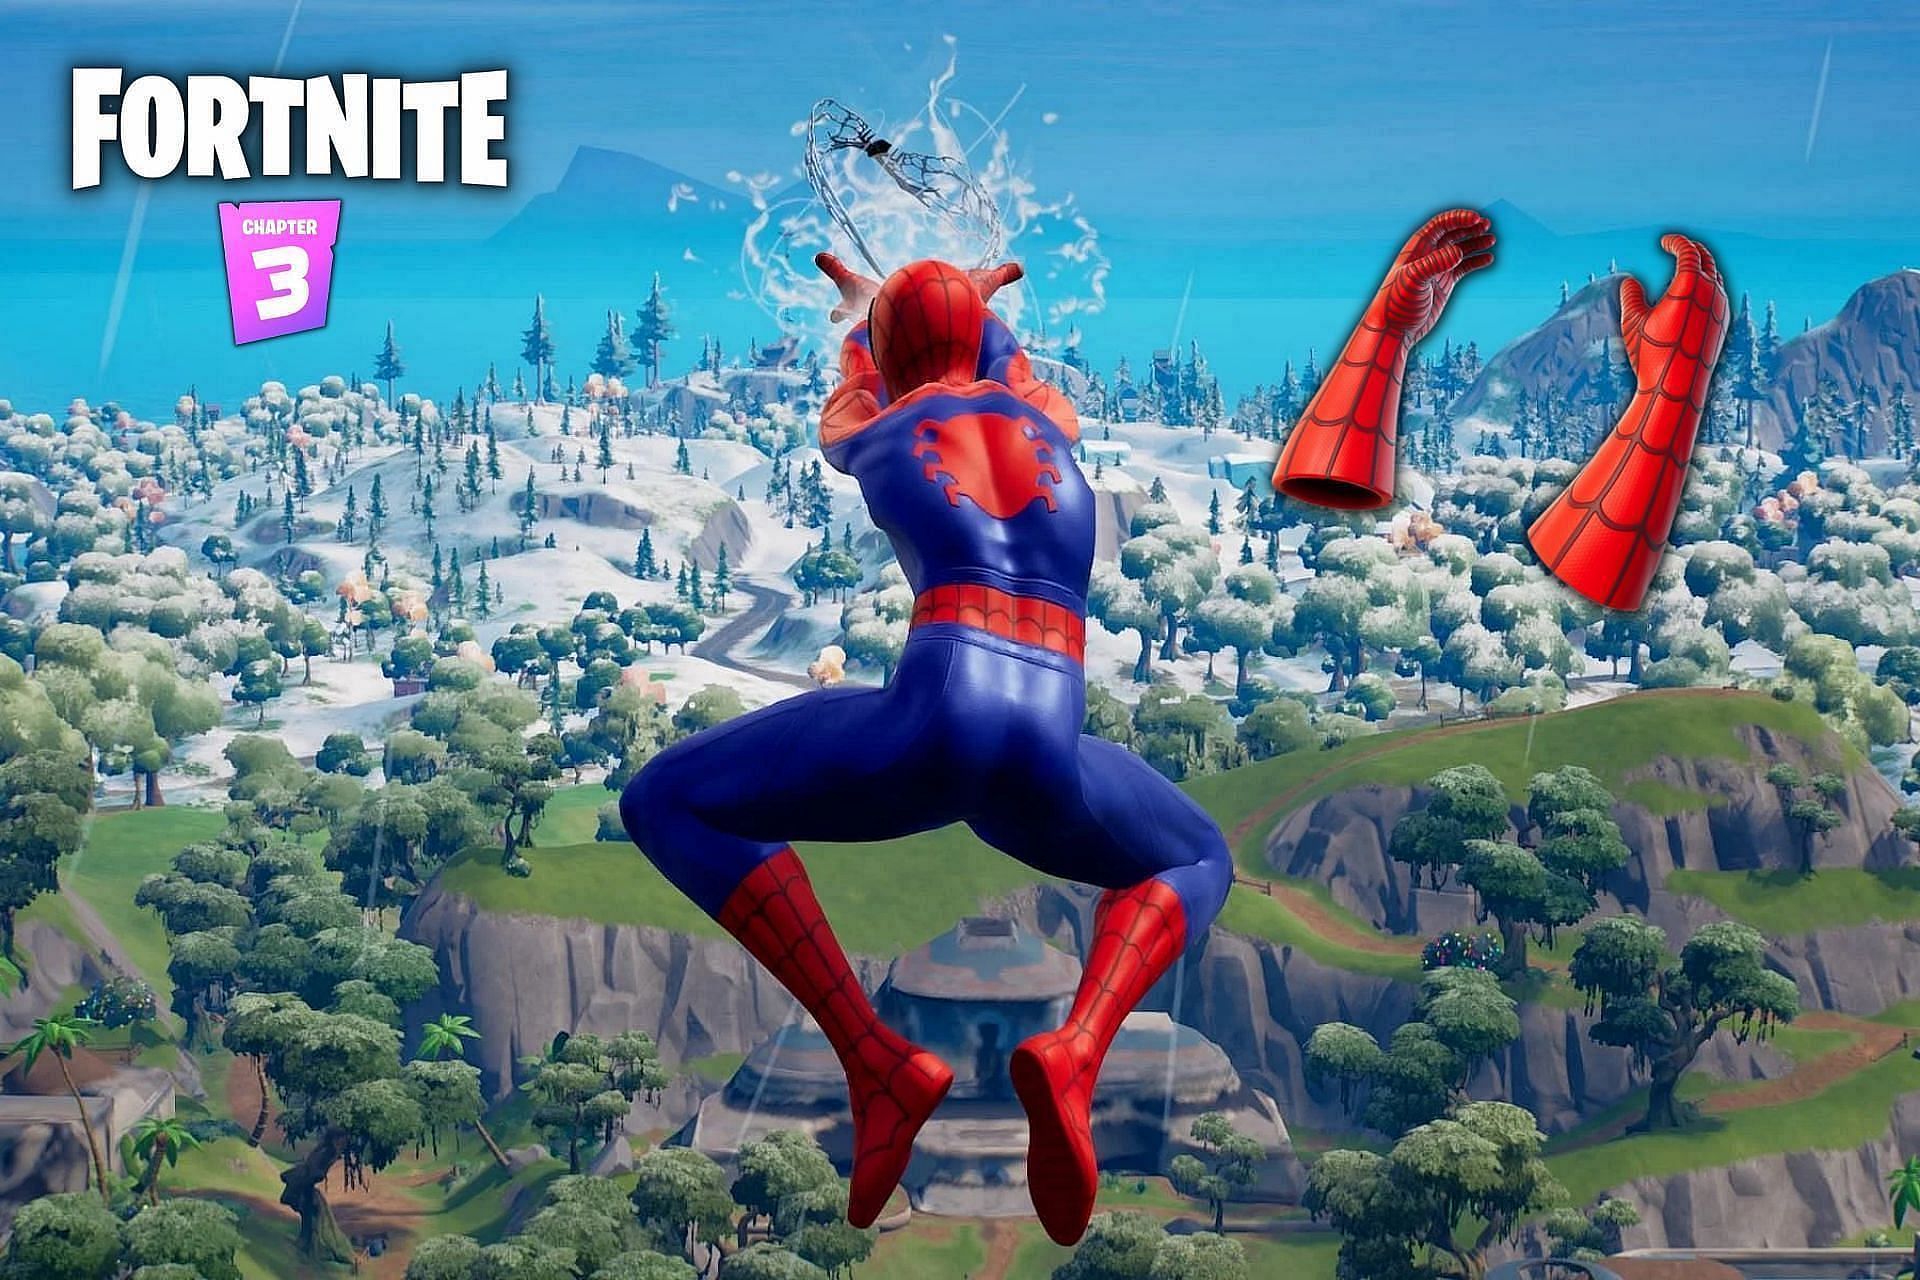 Spider-Man Mythic Web-Shooters to likely return in Fortnite Chapter 3 Season 2